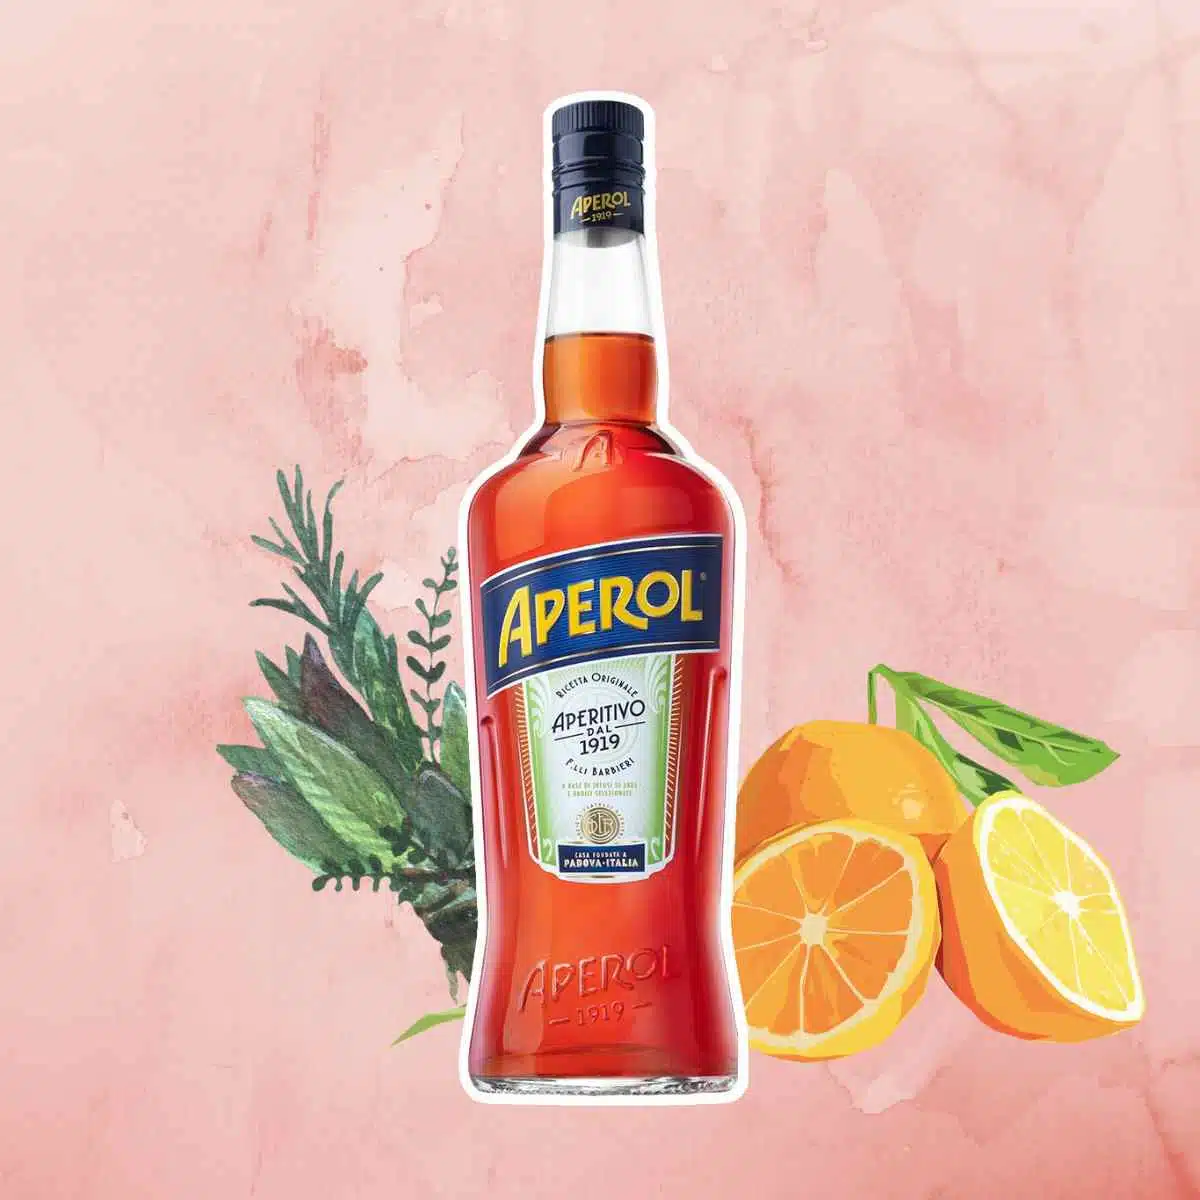 Aperol bottle with orange and herbs in background